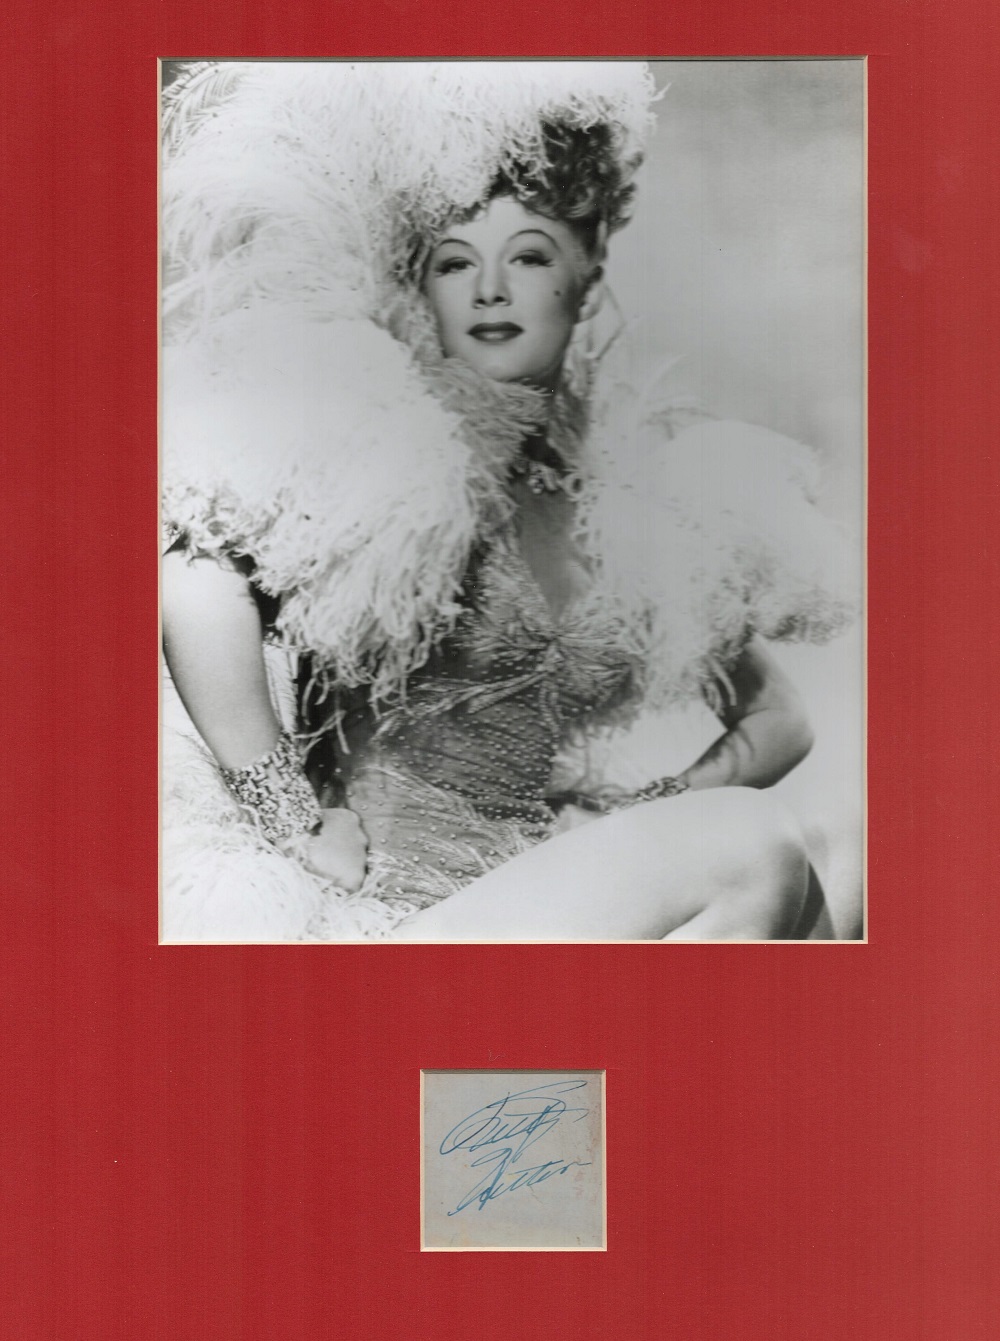 Betty Hutton 16 X 12 Mounted Signature Piece. Hutton was an American stage, film, and television